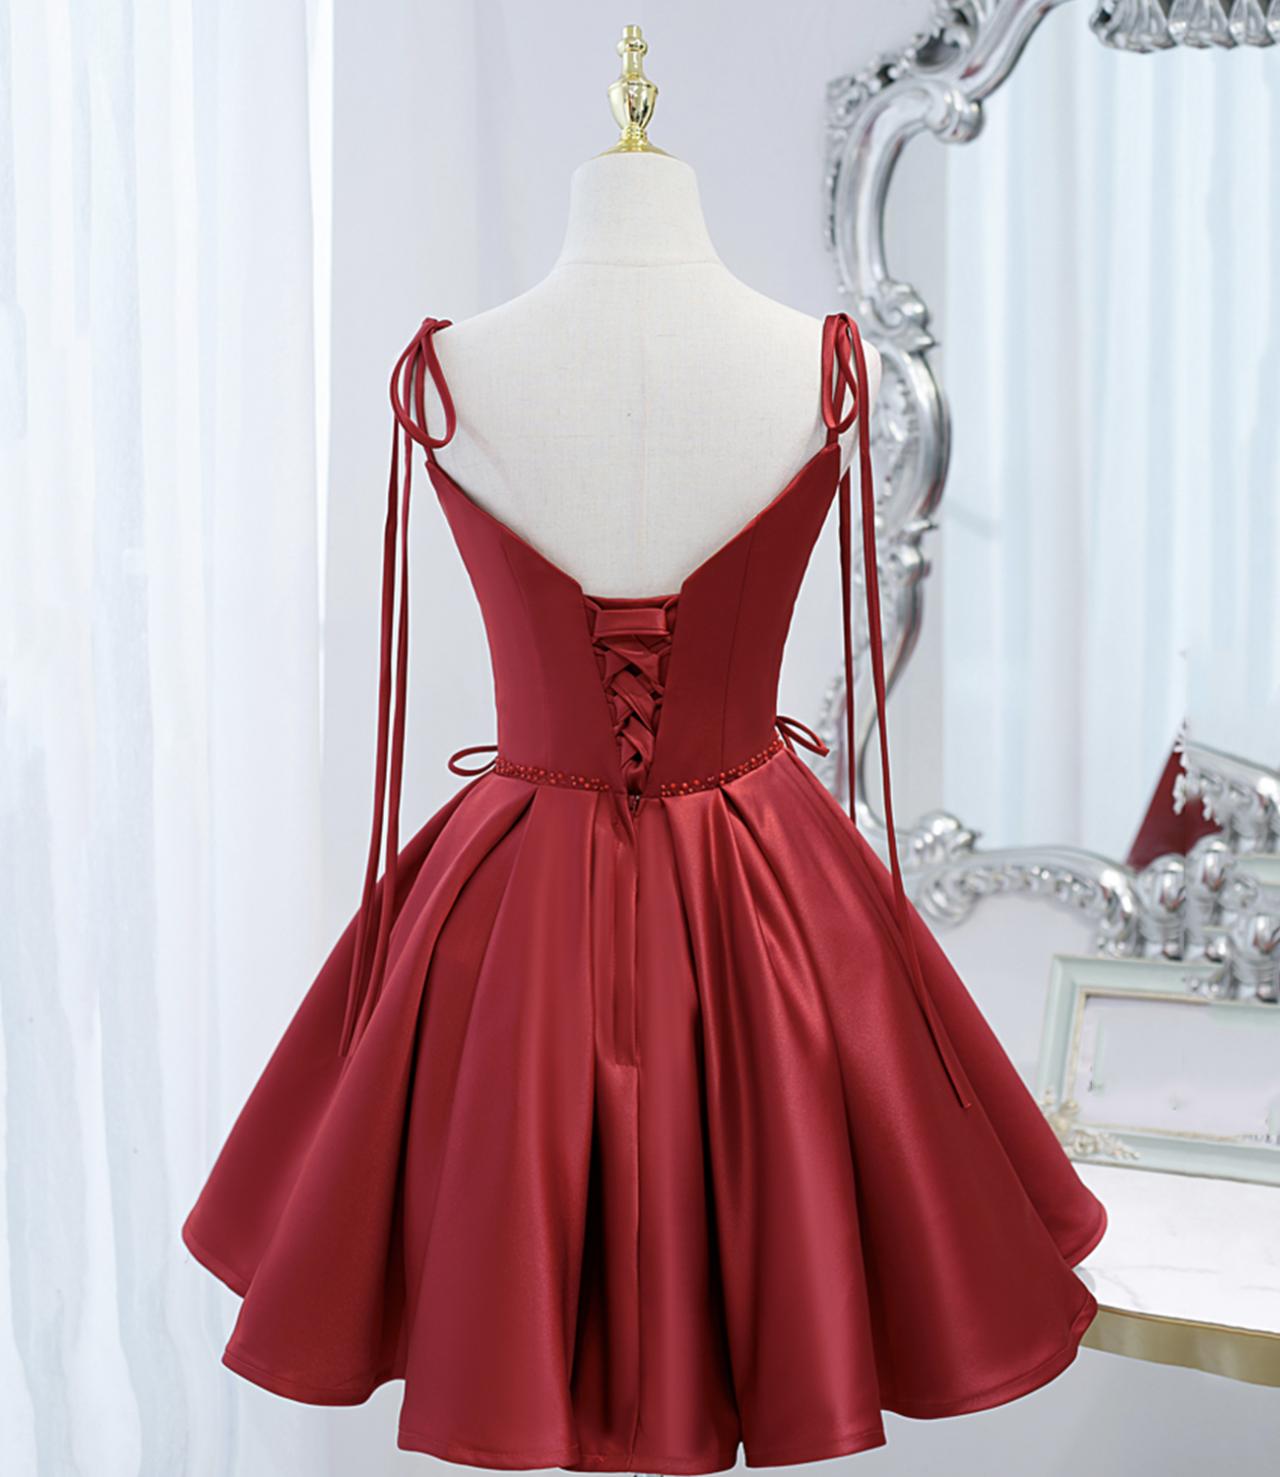 Homecoming Dresses,satin lace-up short prom dress party dress,DP24563